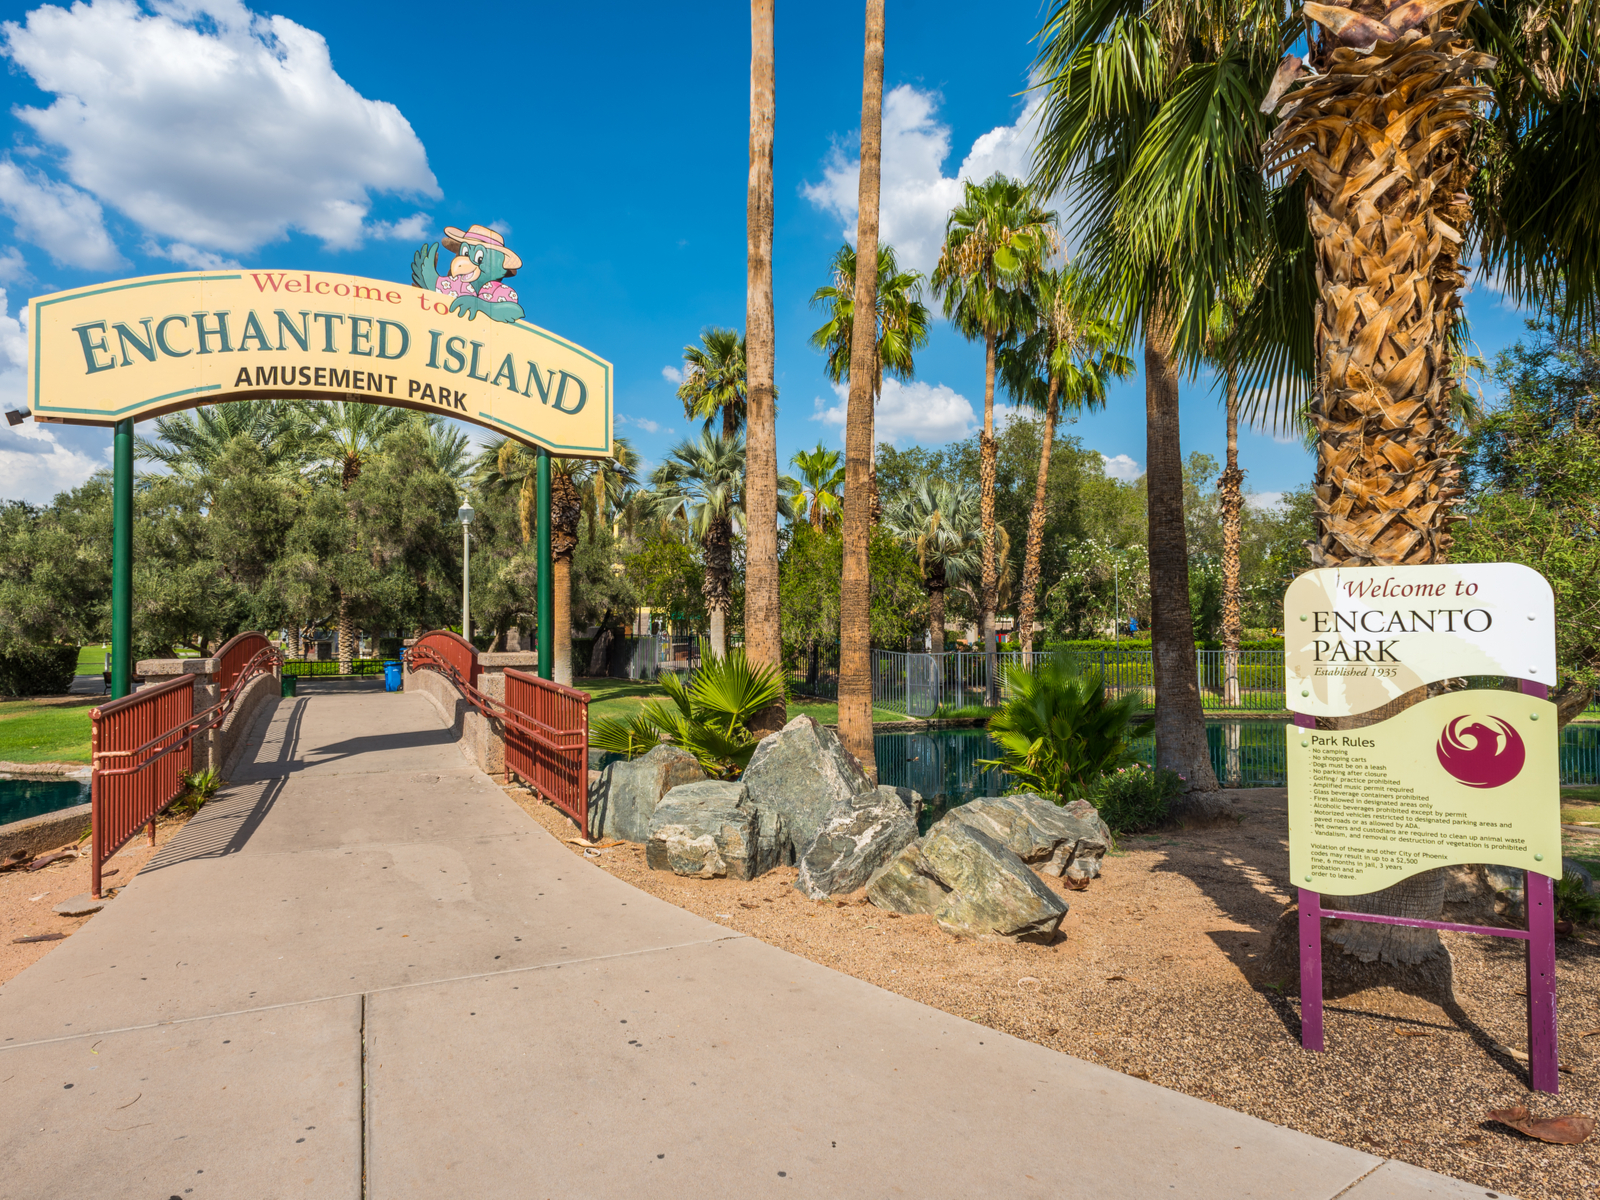 Enchanted Island amusement park, one of the best things to do in Phoenix